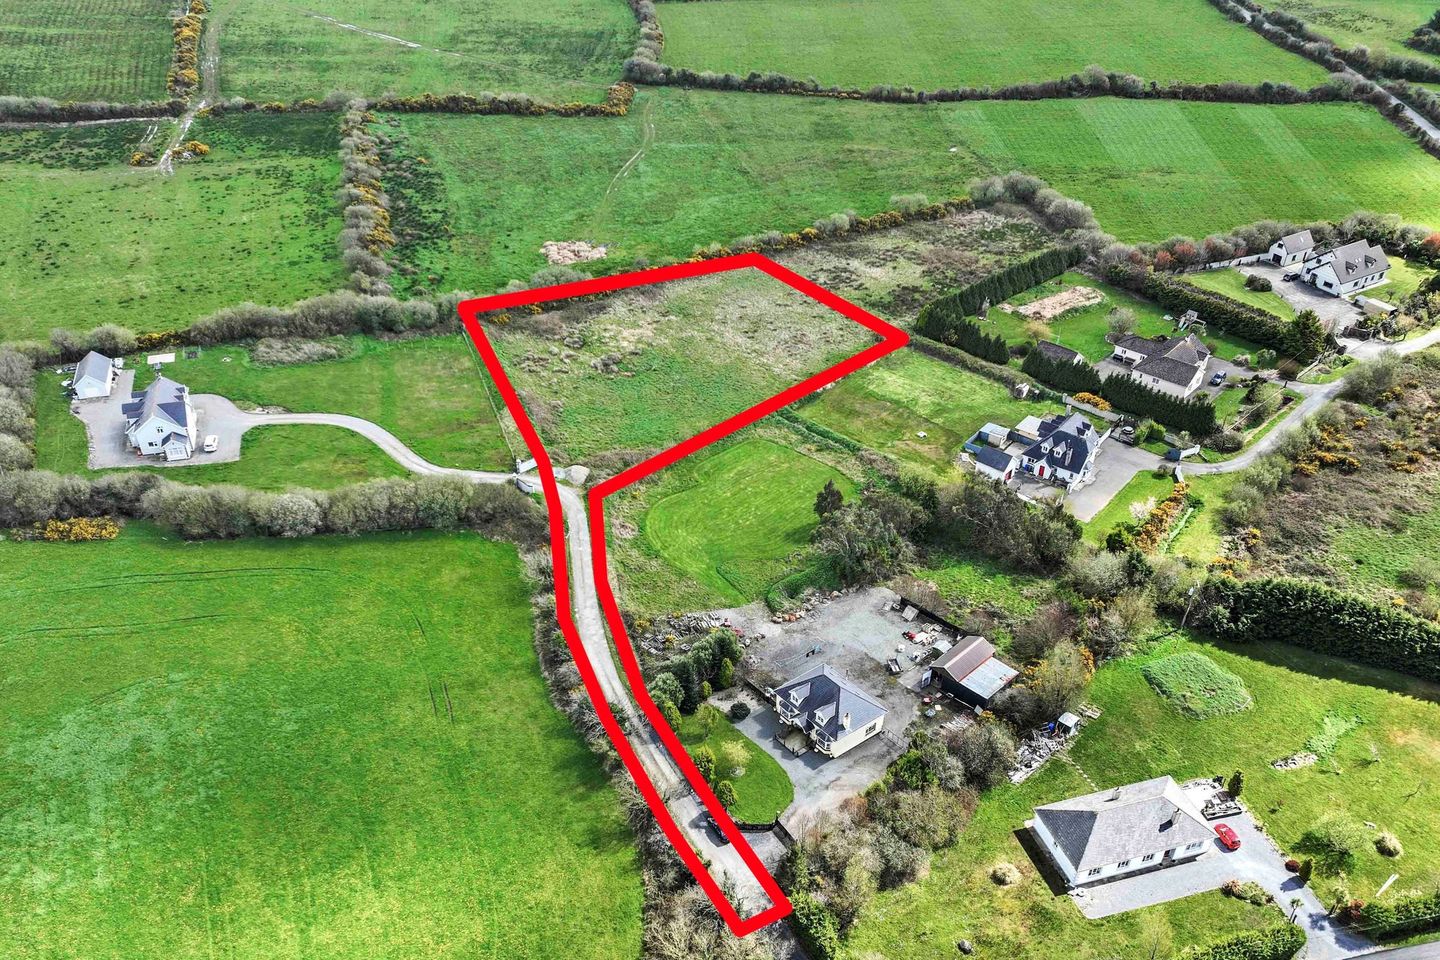 c. 1.26 Acre Site (A) at Gorteenminogue Upper, Murrintown, Co. Wexford